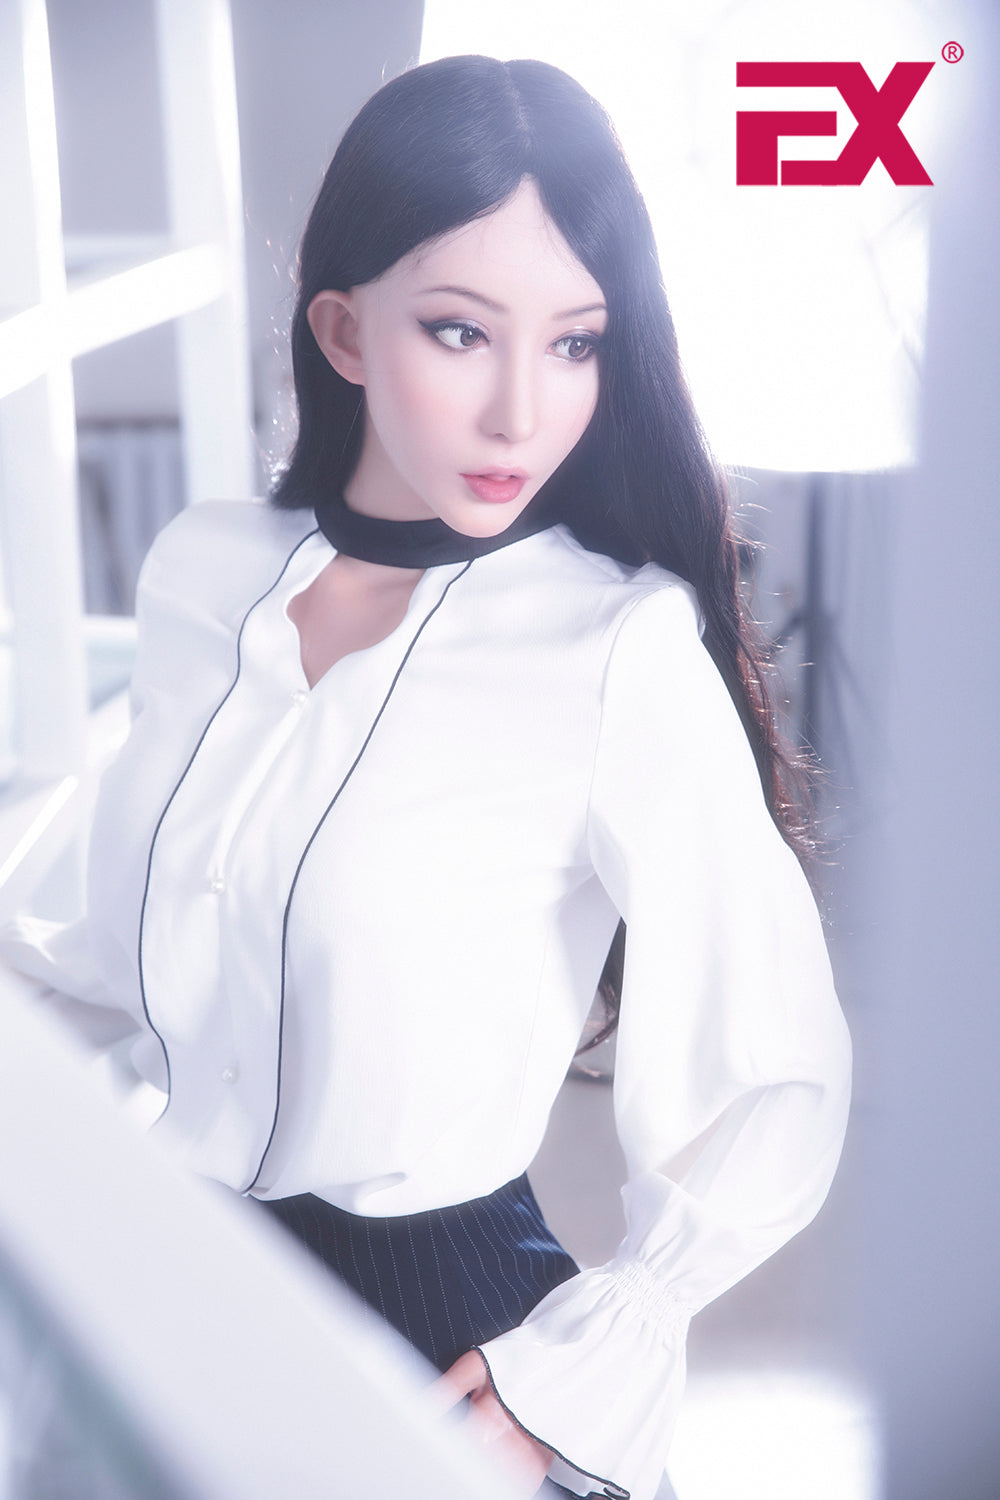 EX Doll Clone Series 168 cm Silicone - En Hee | Buy Sex Dolls at DOLLS ACTUALLY